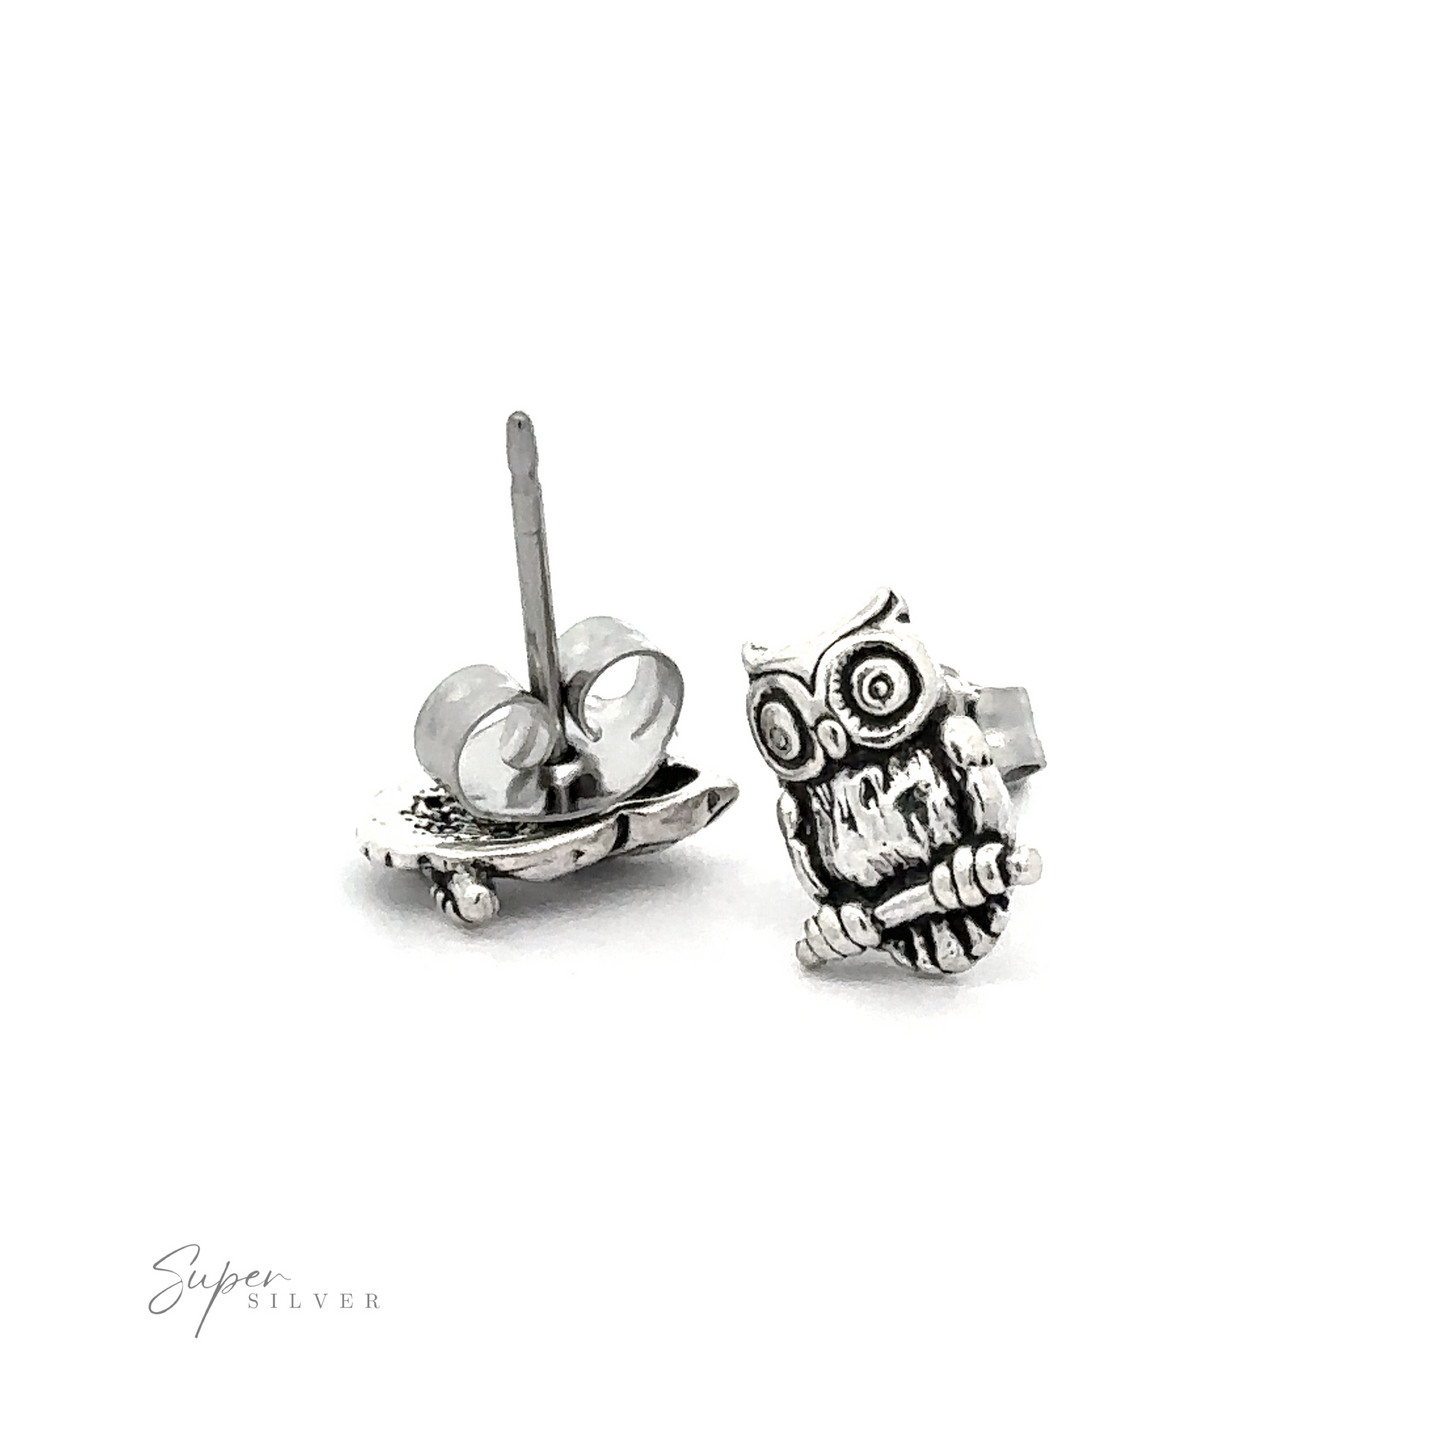 A pair of Owl Studs on a white background.